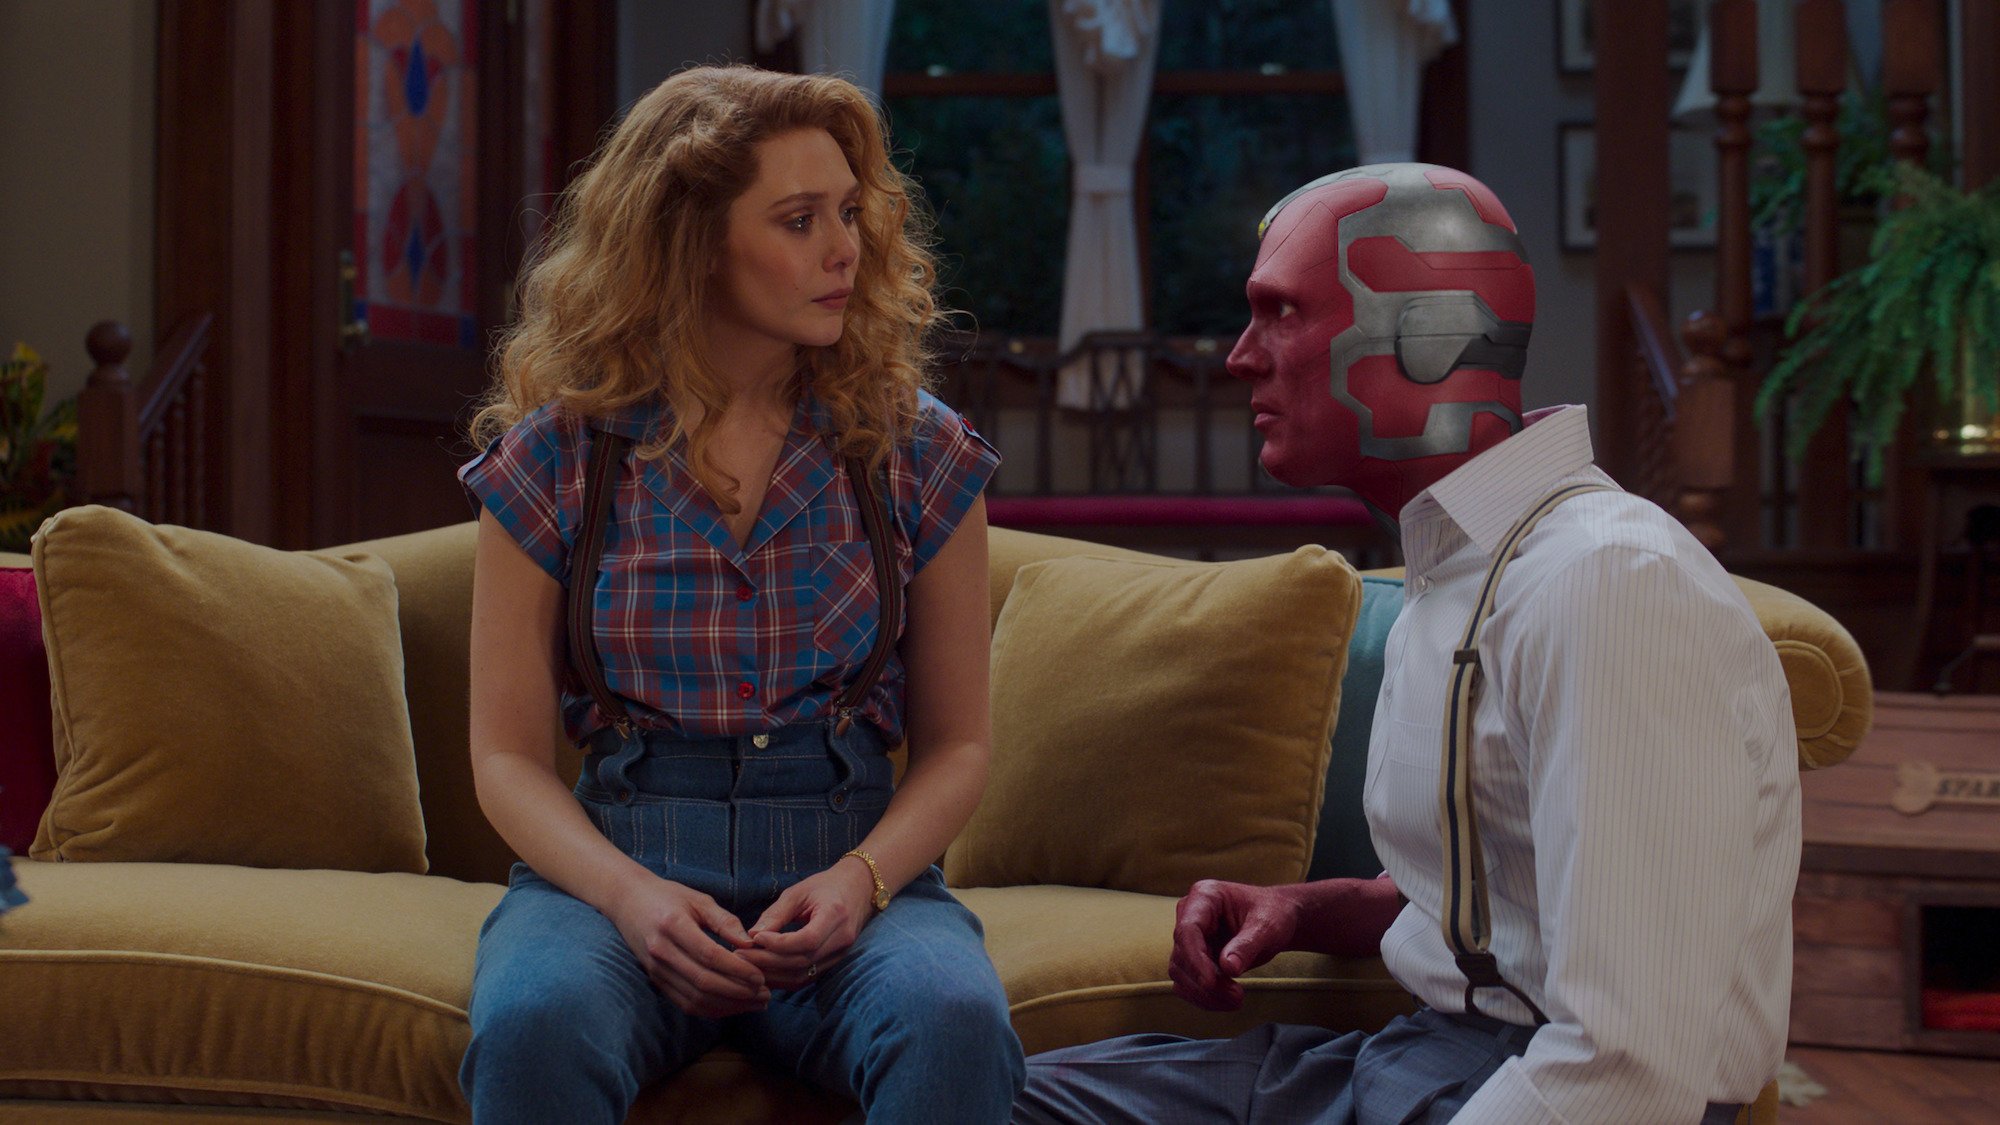 Elizabeth Olsen as Wanda Maximoff and Paul Bettany as Vision in their 80s attire on 'WandaVision'